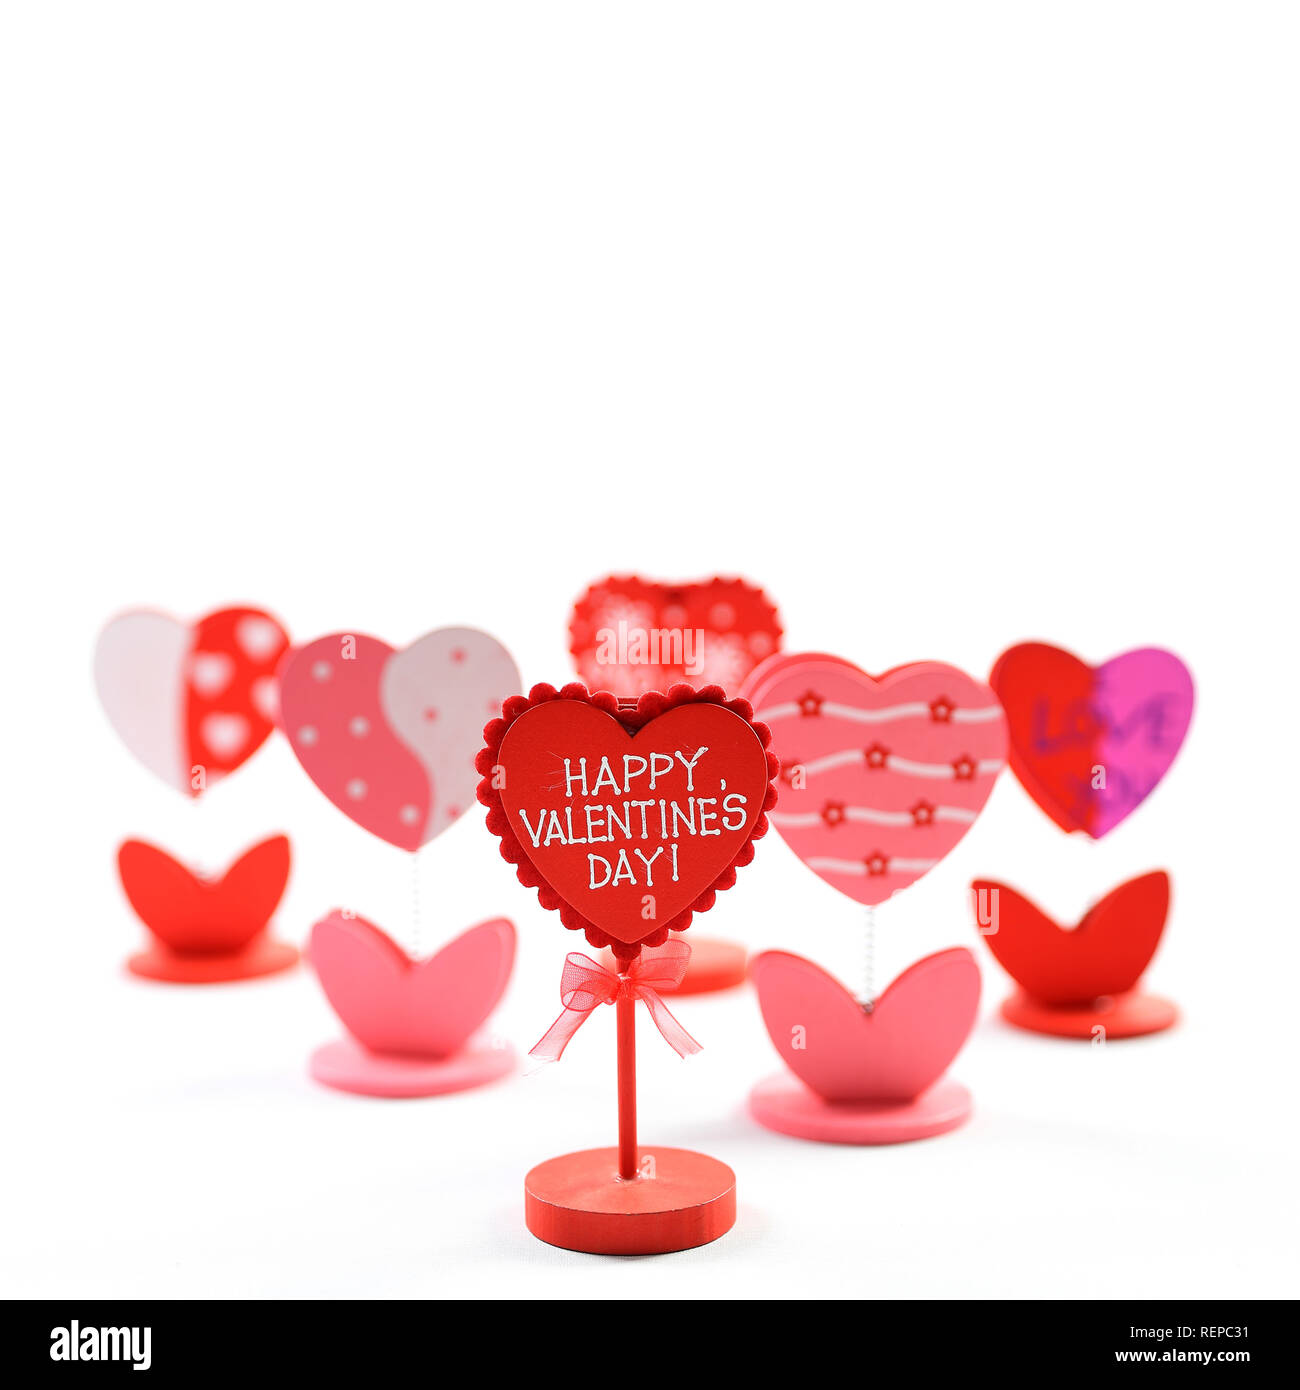 Heart Shaped Happy Valentine S Day Note Holder On Isolated White Background Stock Photo Alamy